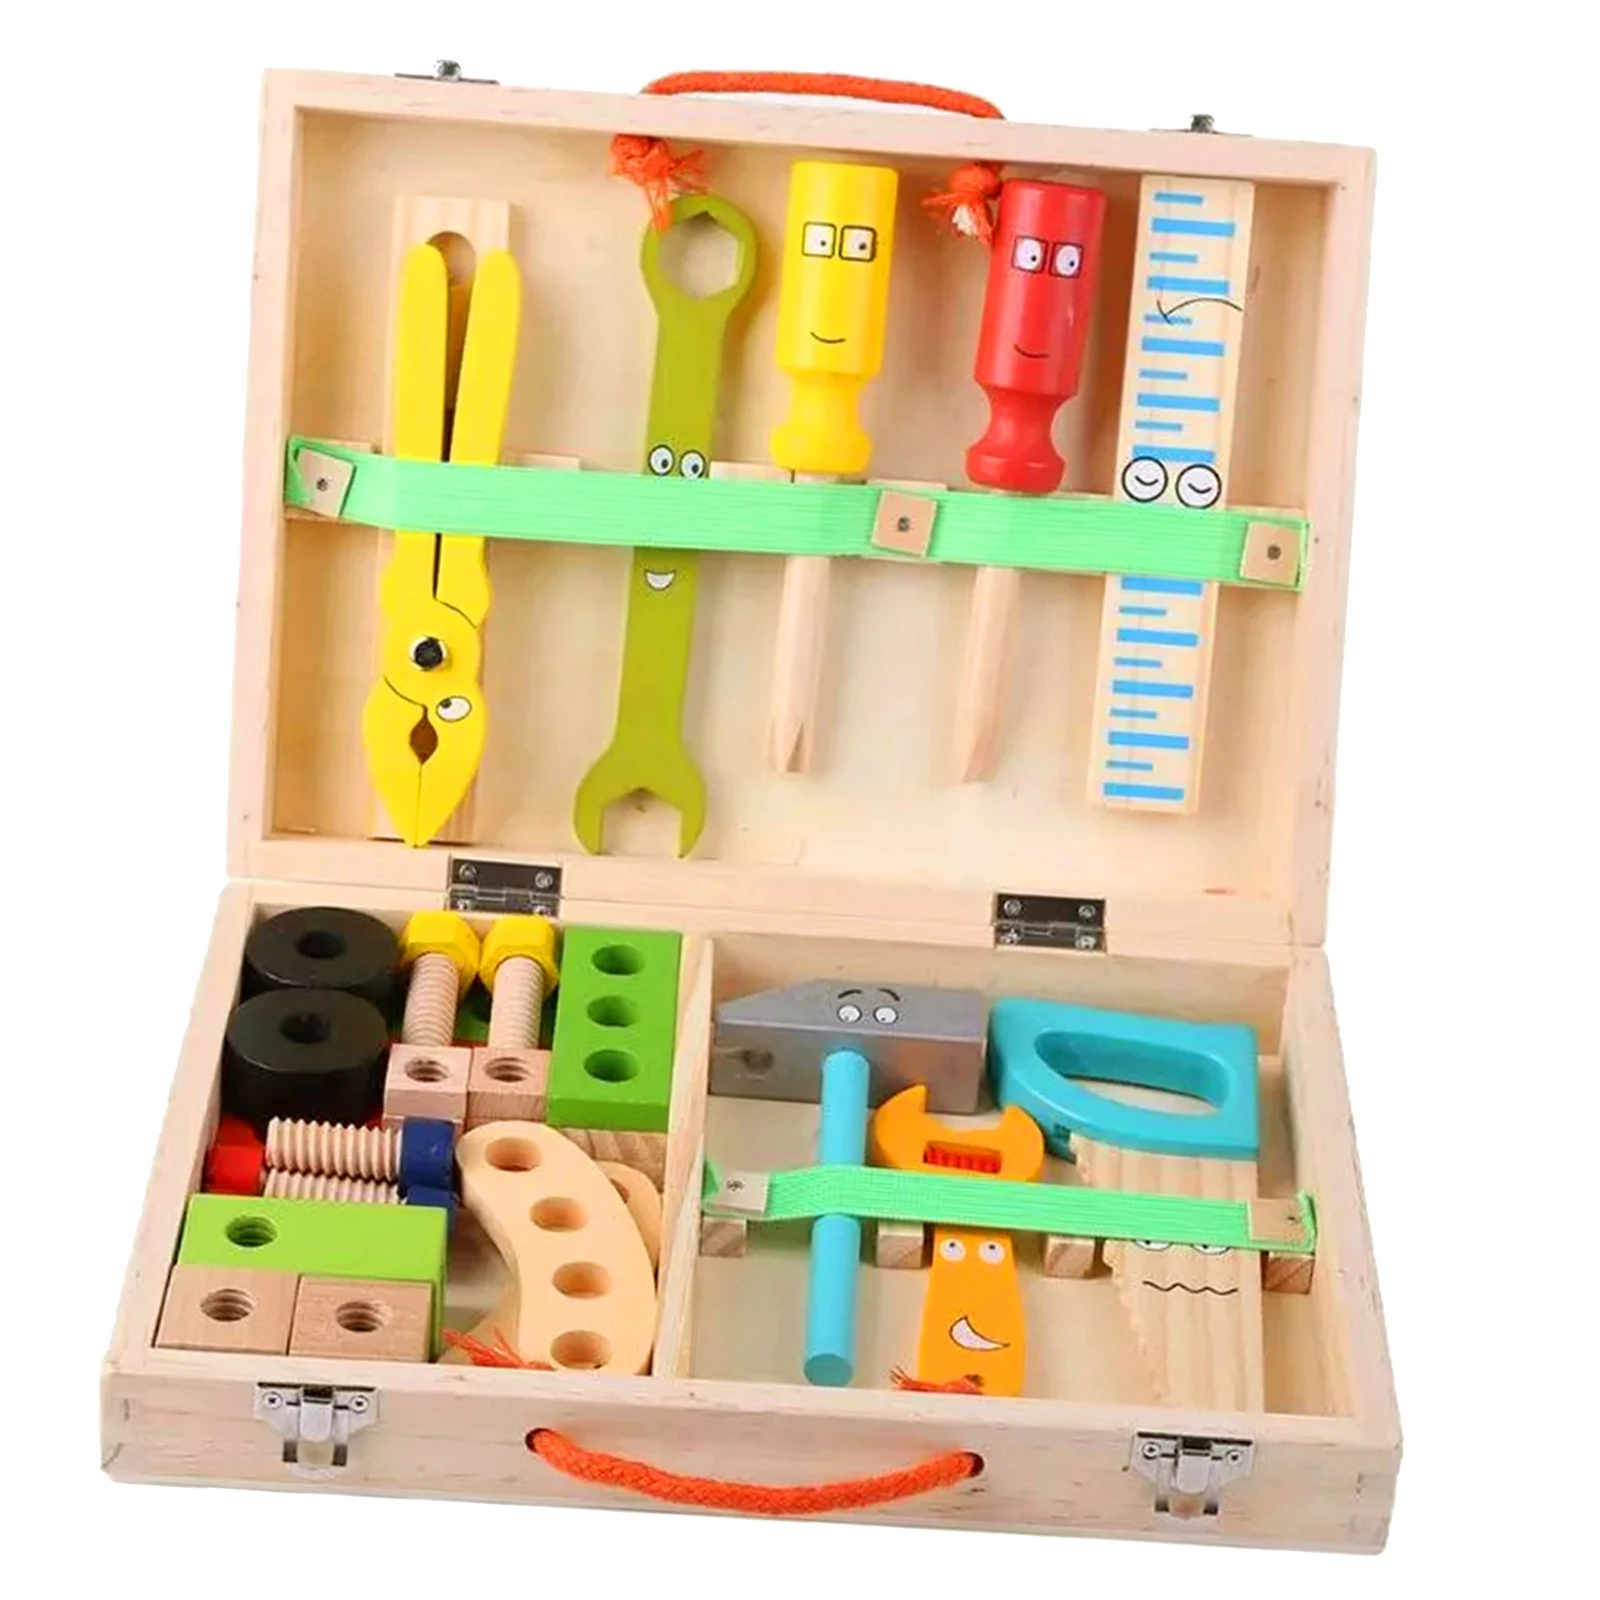 Wooden Repair Tools Box for Children Educational Puzzle Toys Games